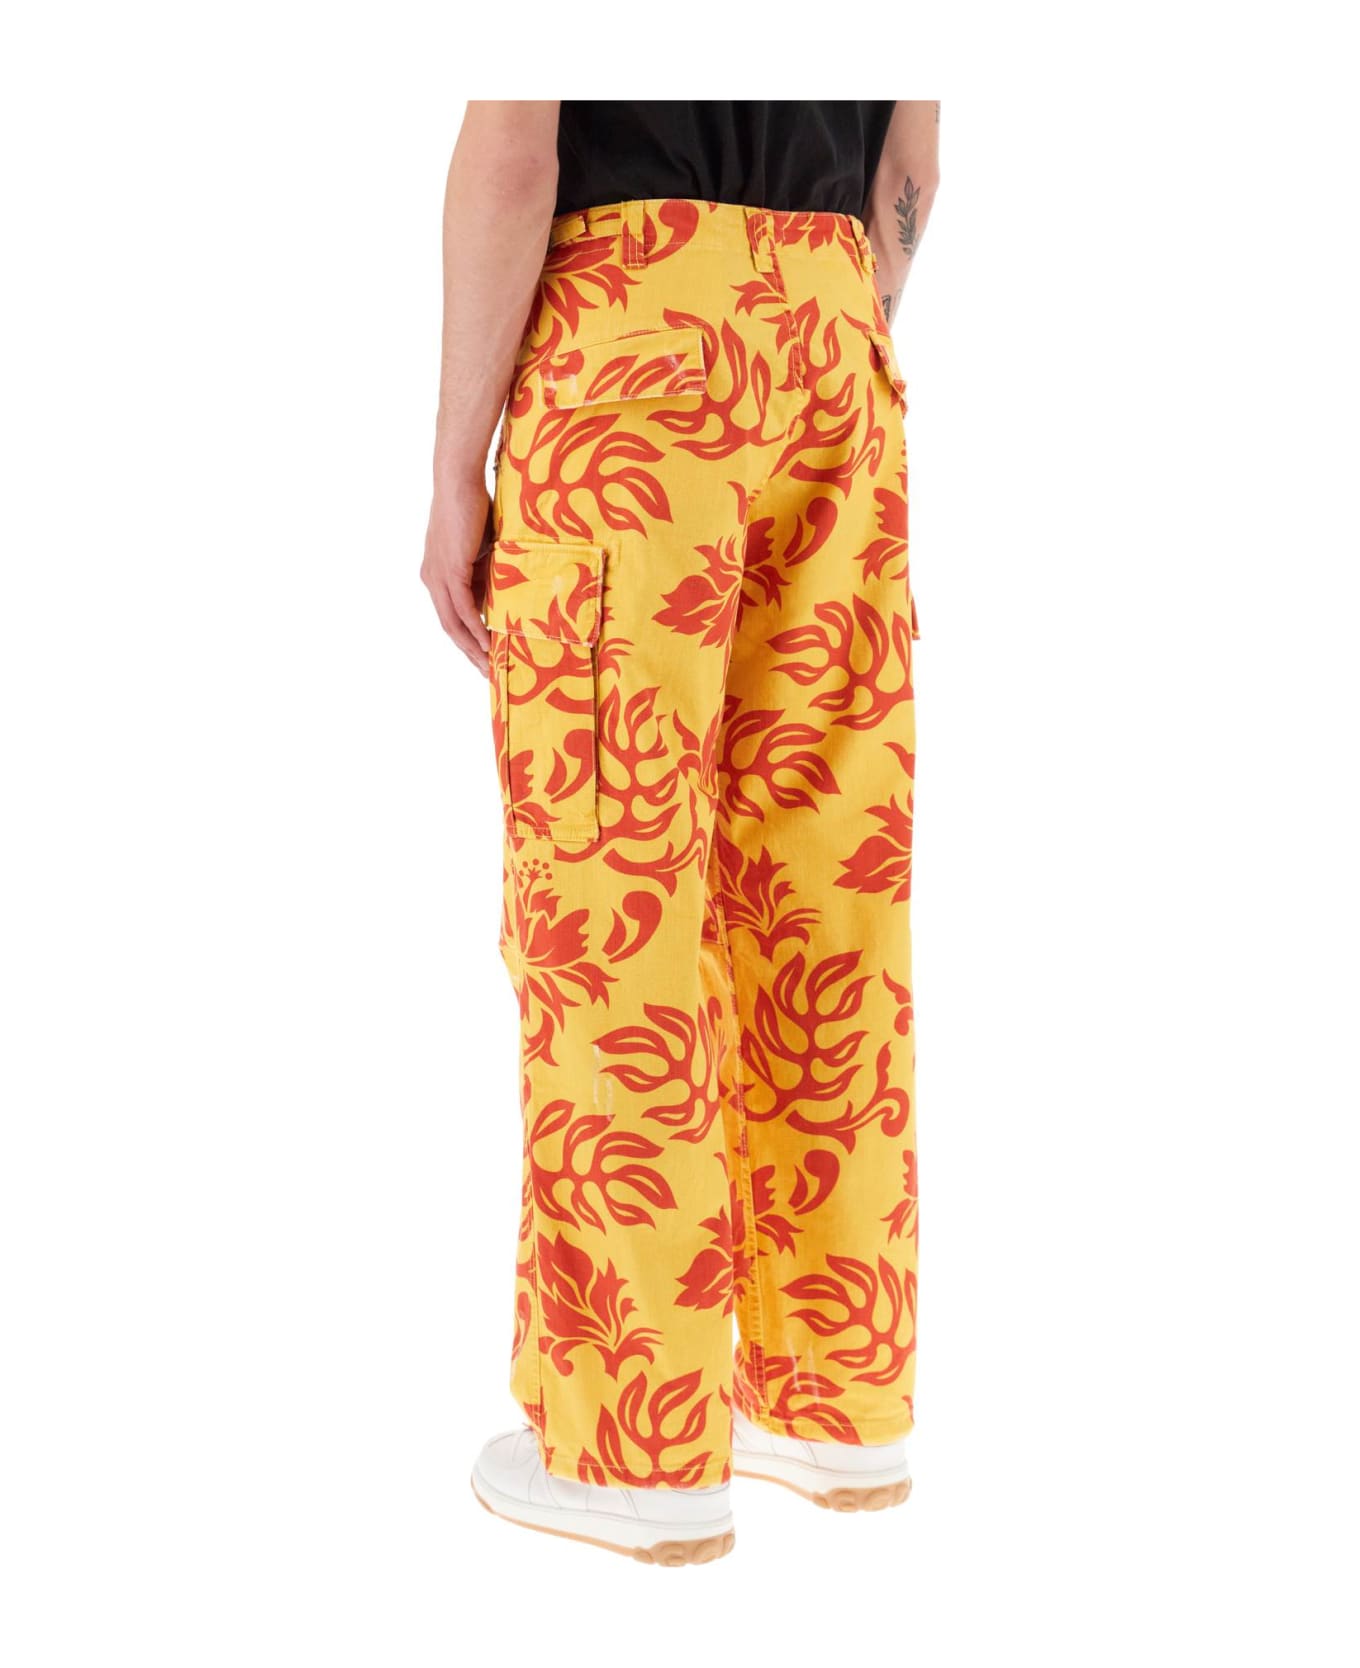 ERL Floral Cargo Pants - ERL TROPICAL FLOWERS 3 (Yellow)